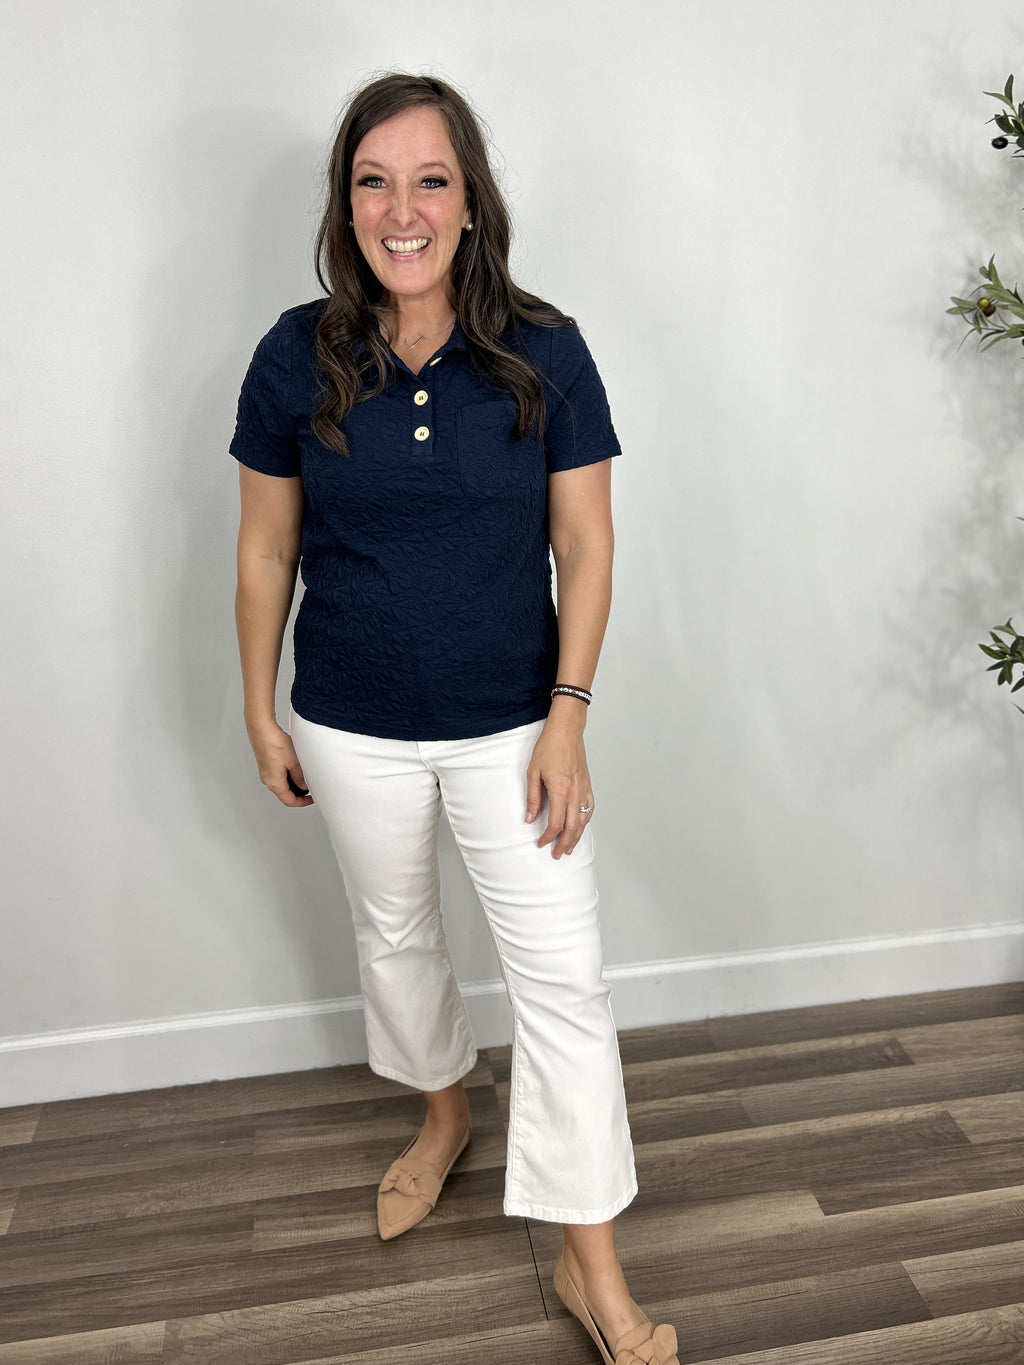 Women's navy blue textured short sleeve henley top paired with white crop flare pants and camel color shoes.